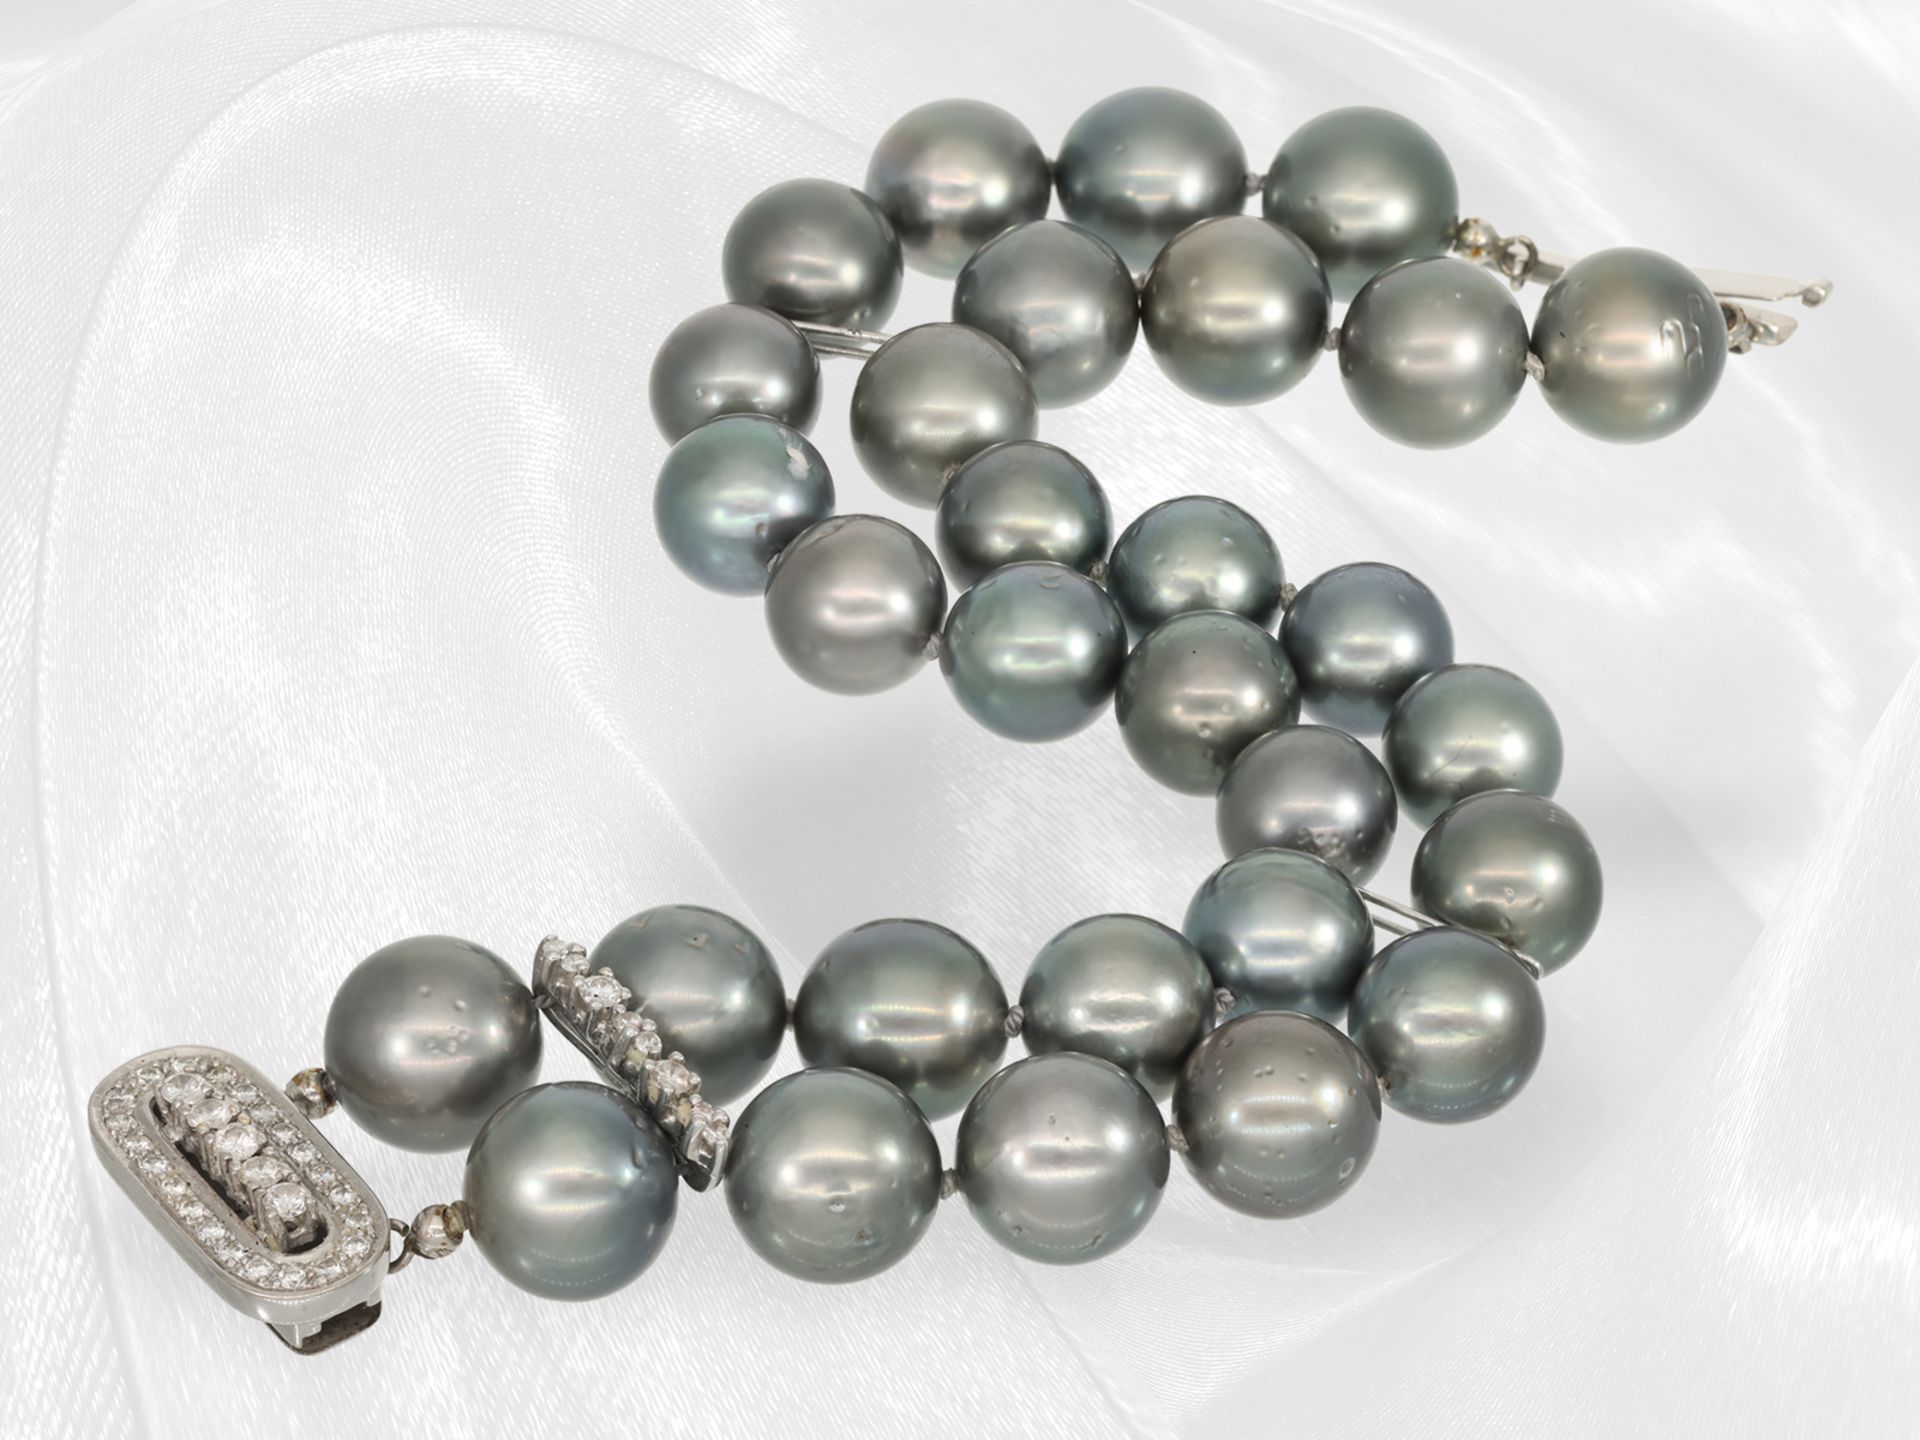 Very decorative double row Tahiti cultured pearl bracelet, 14K white gold clasp set with brilliant-c - Image 5 of 6